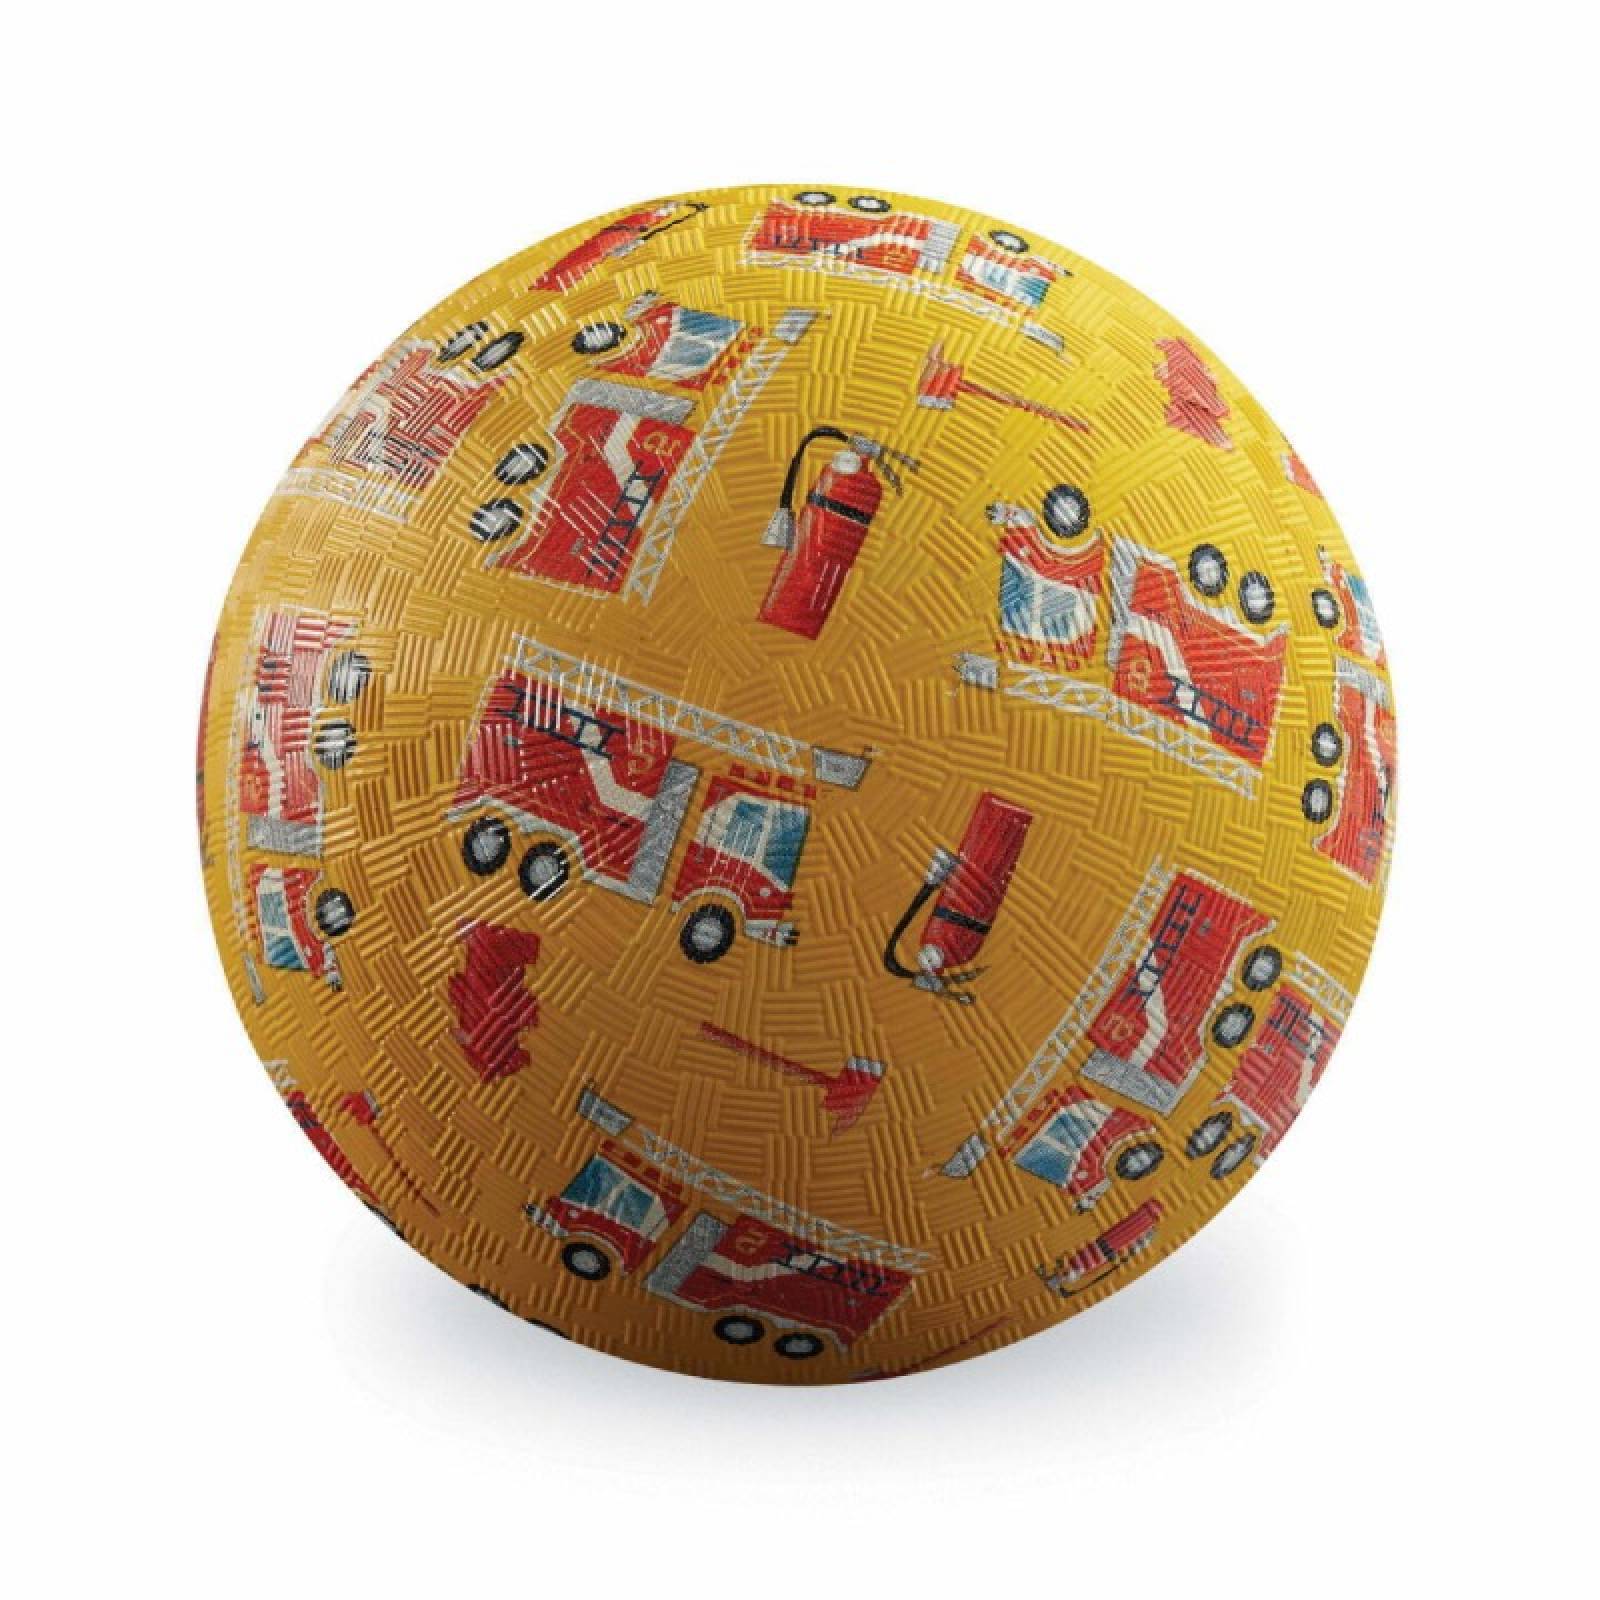 Fire Truck - Large Rubber Picture Ball 18cm